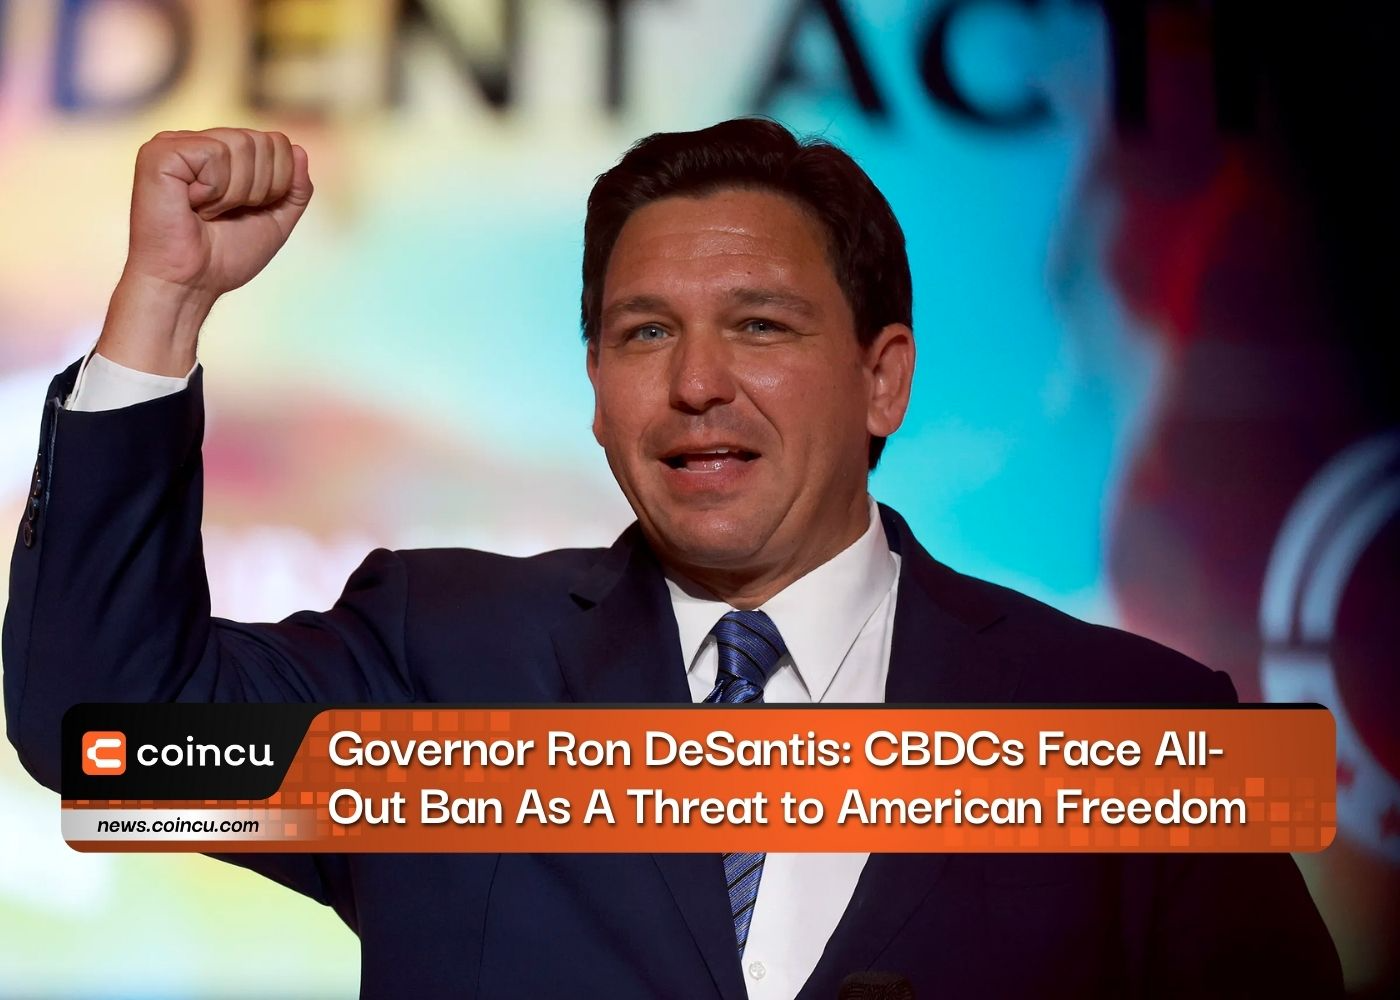 Governor Ron DeSantis: CBDCs Face All-Out Ban As A Threat To American Freedom